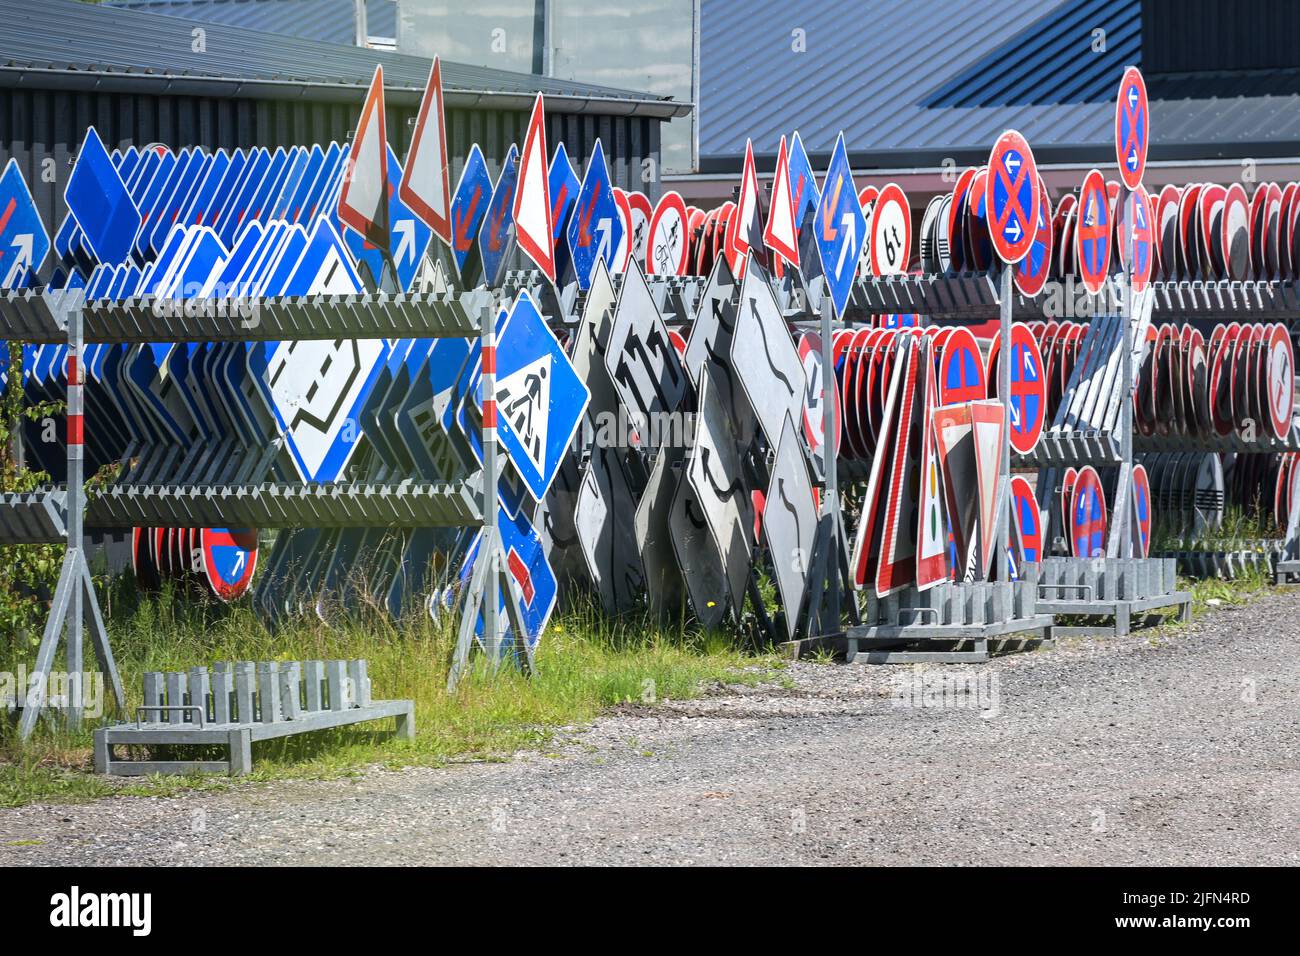 Storage place for European road traffic signs on an outdoor area, selected focus, narrow depth of field Stock Photo